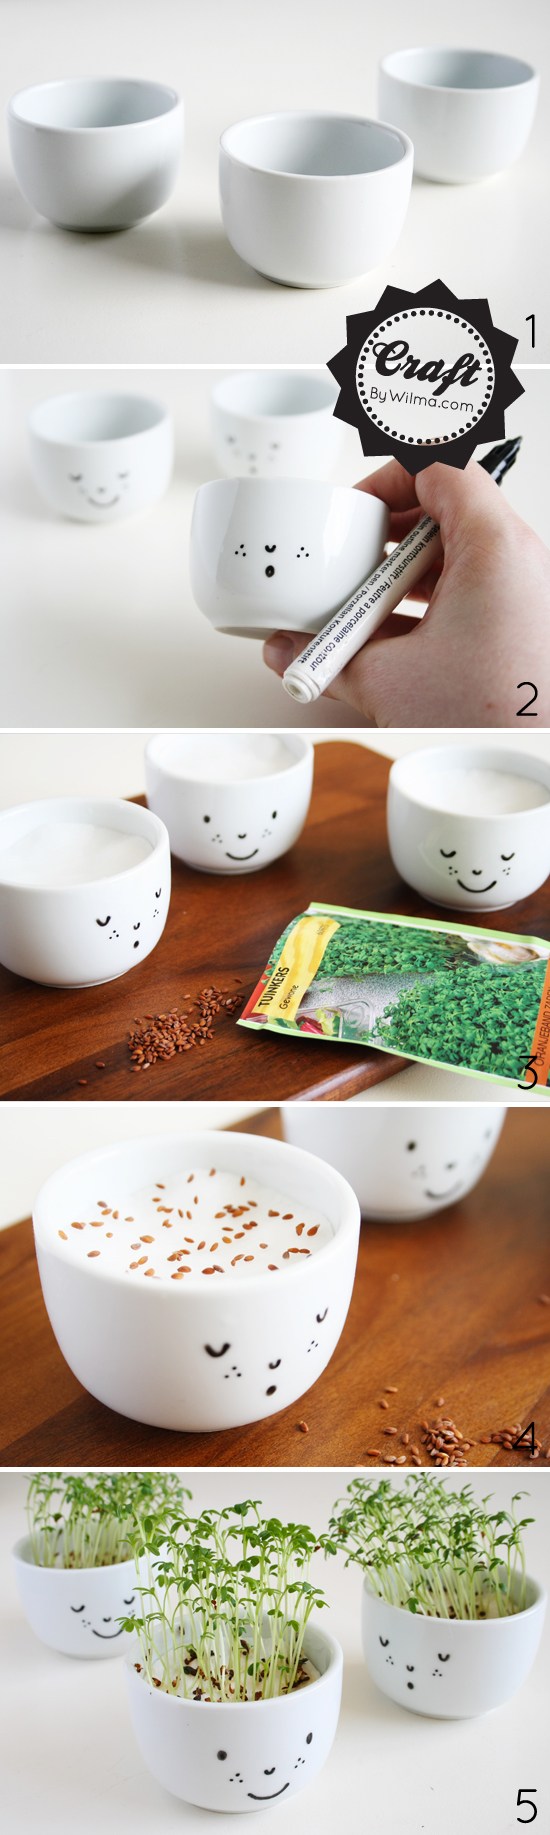 http://www.nobiggie.net/wp-content/uploads/2016/02/cute-cress-cups-with-a-face-diy.jpg